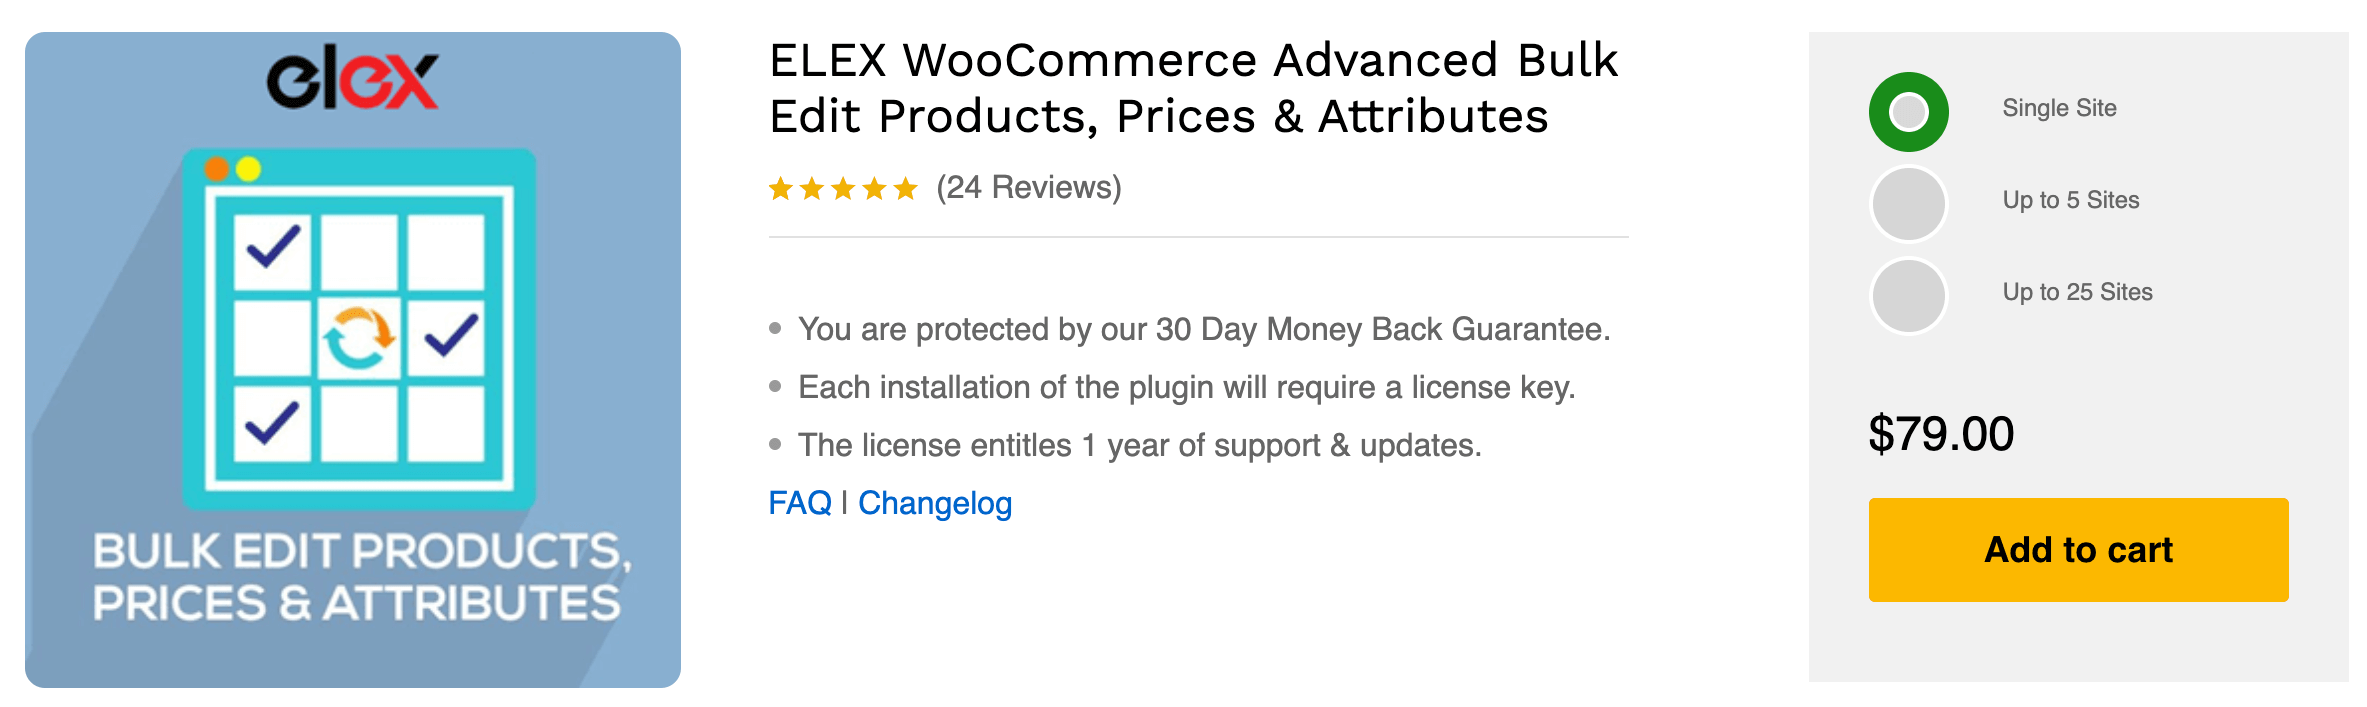 ELEX WooCommerce Advanced Bulk Edit Products, Prices, and Attributes